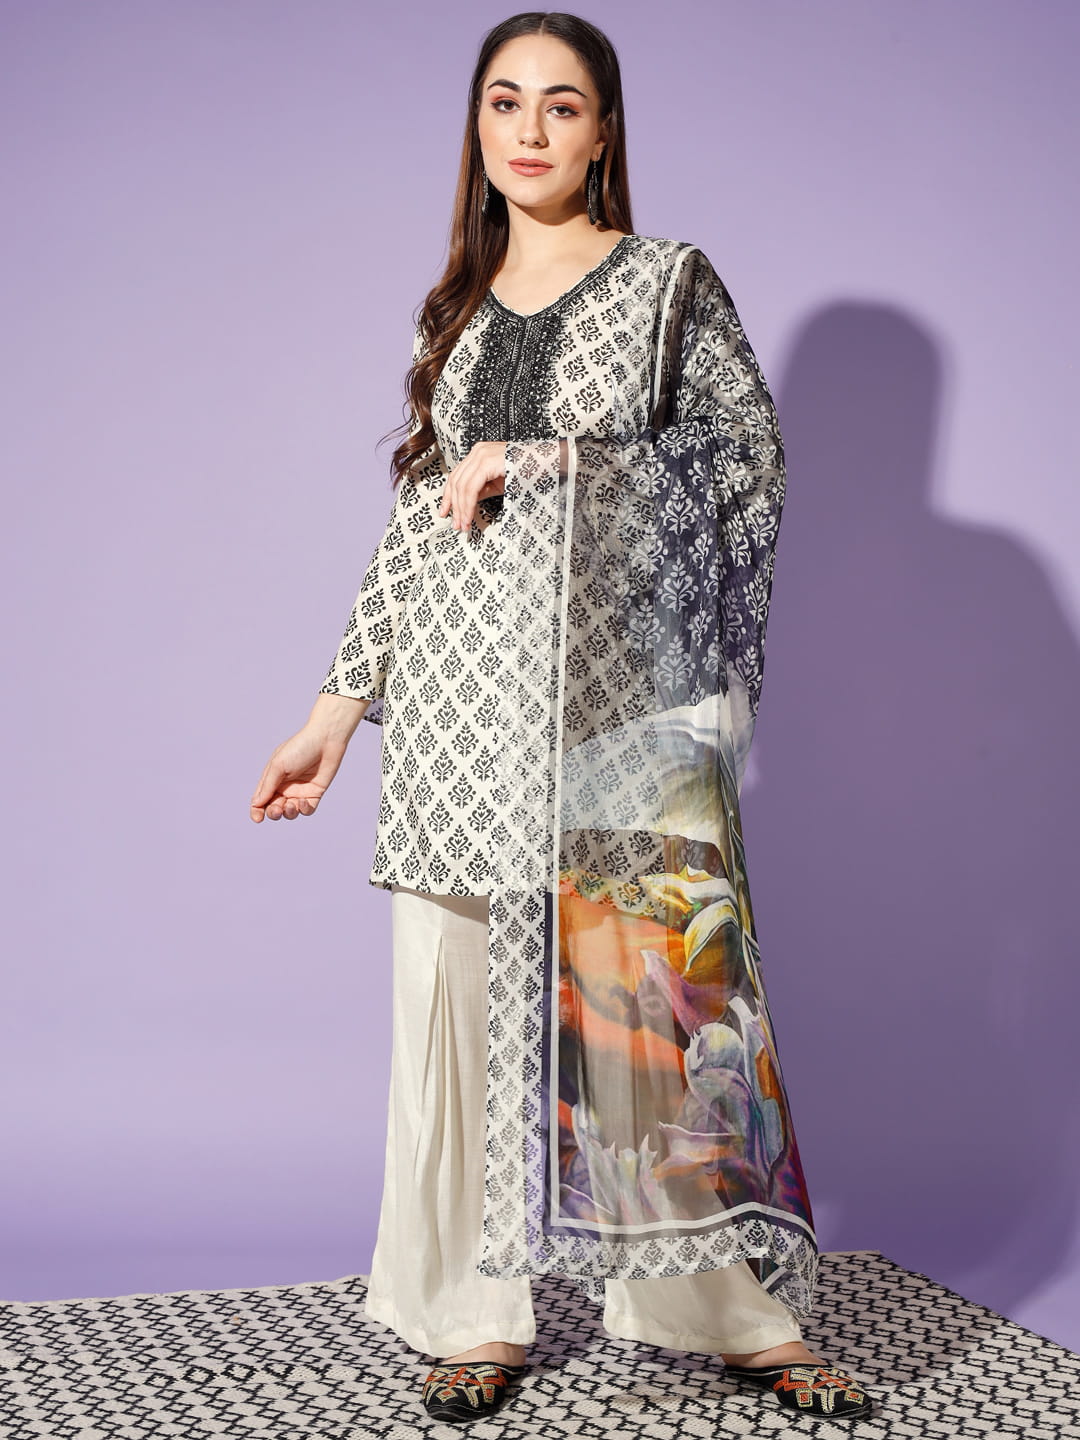 Monochrome Majesty: A Cream and Black Printed Suit | Hues of India